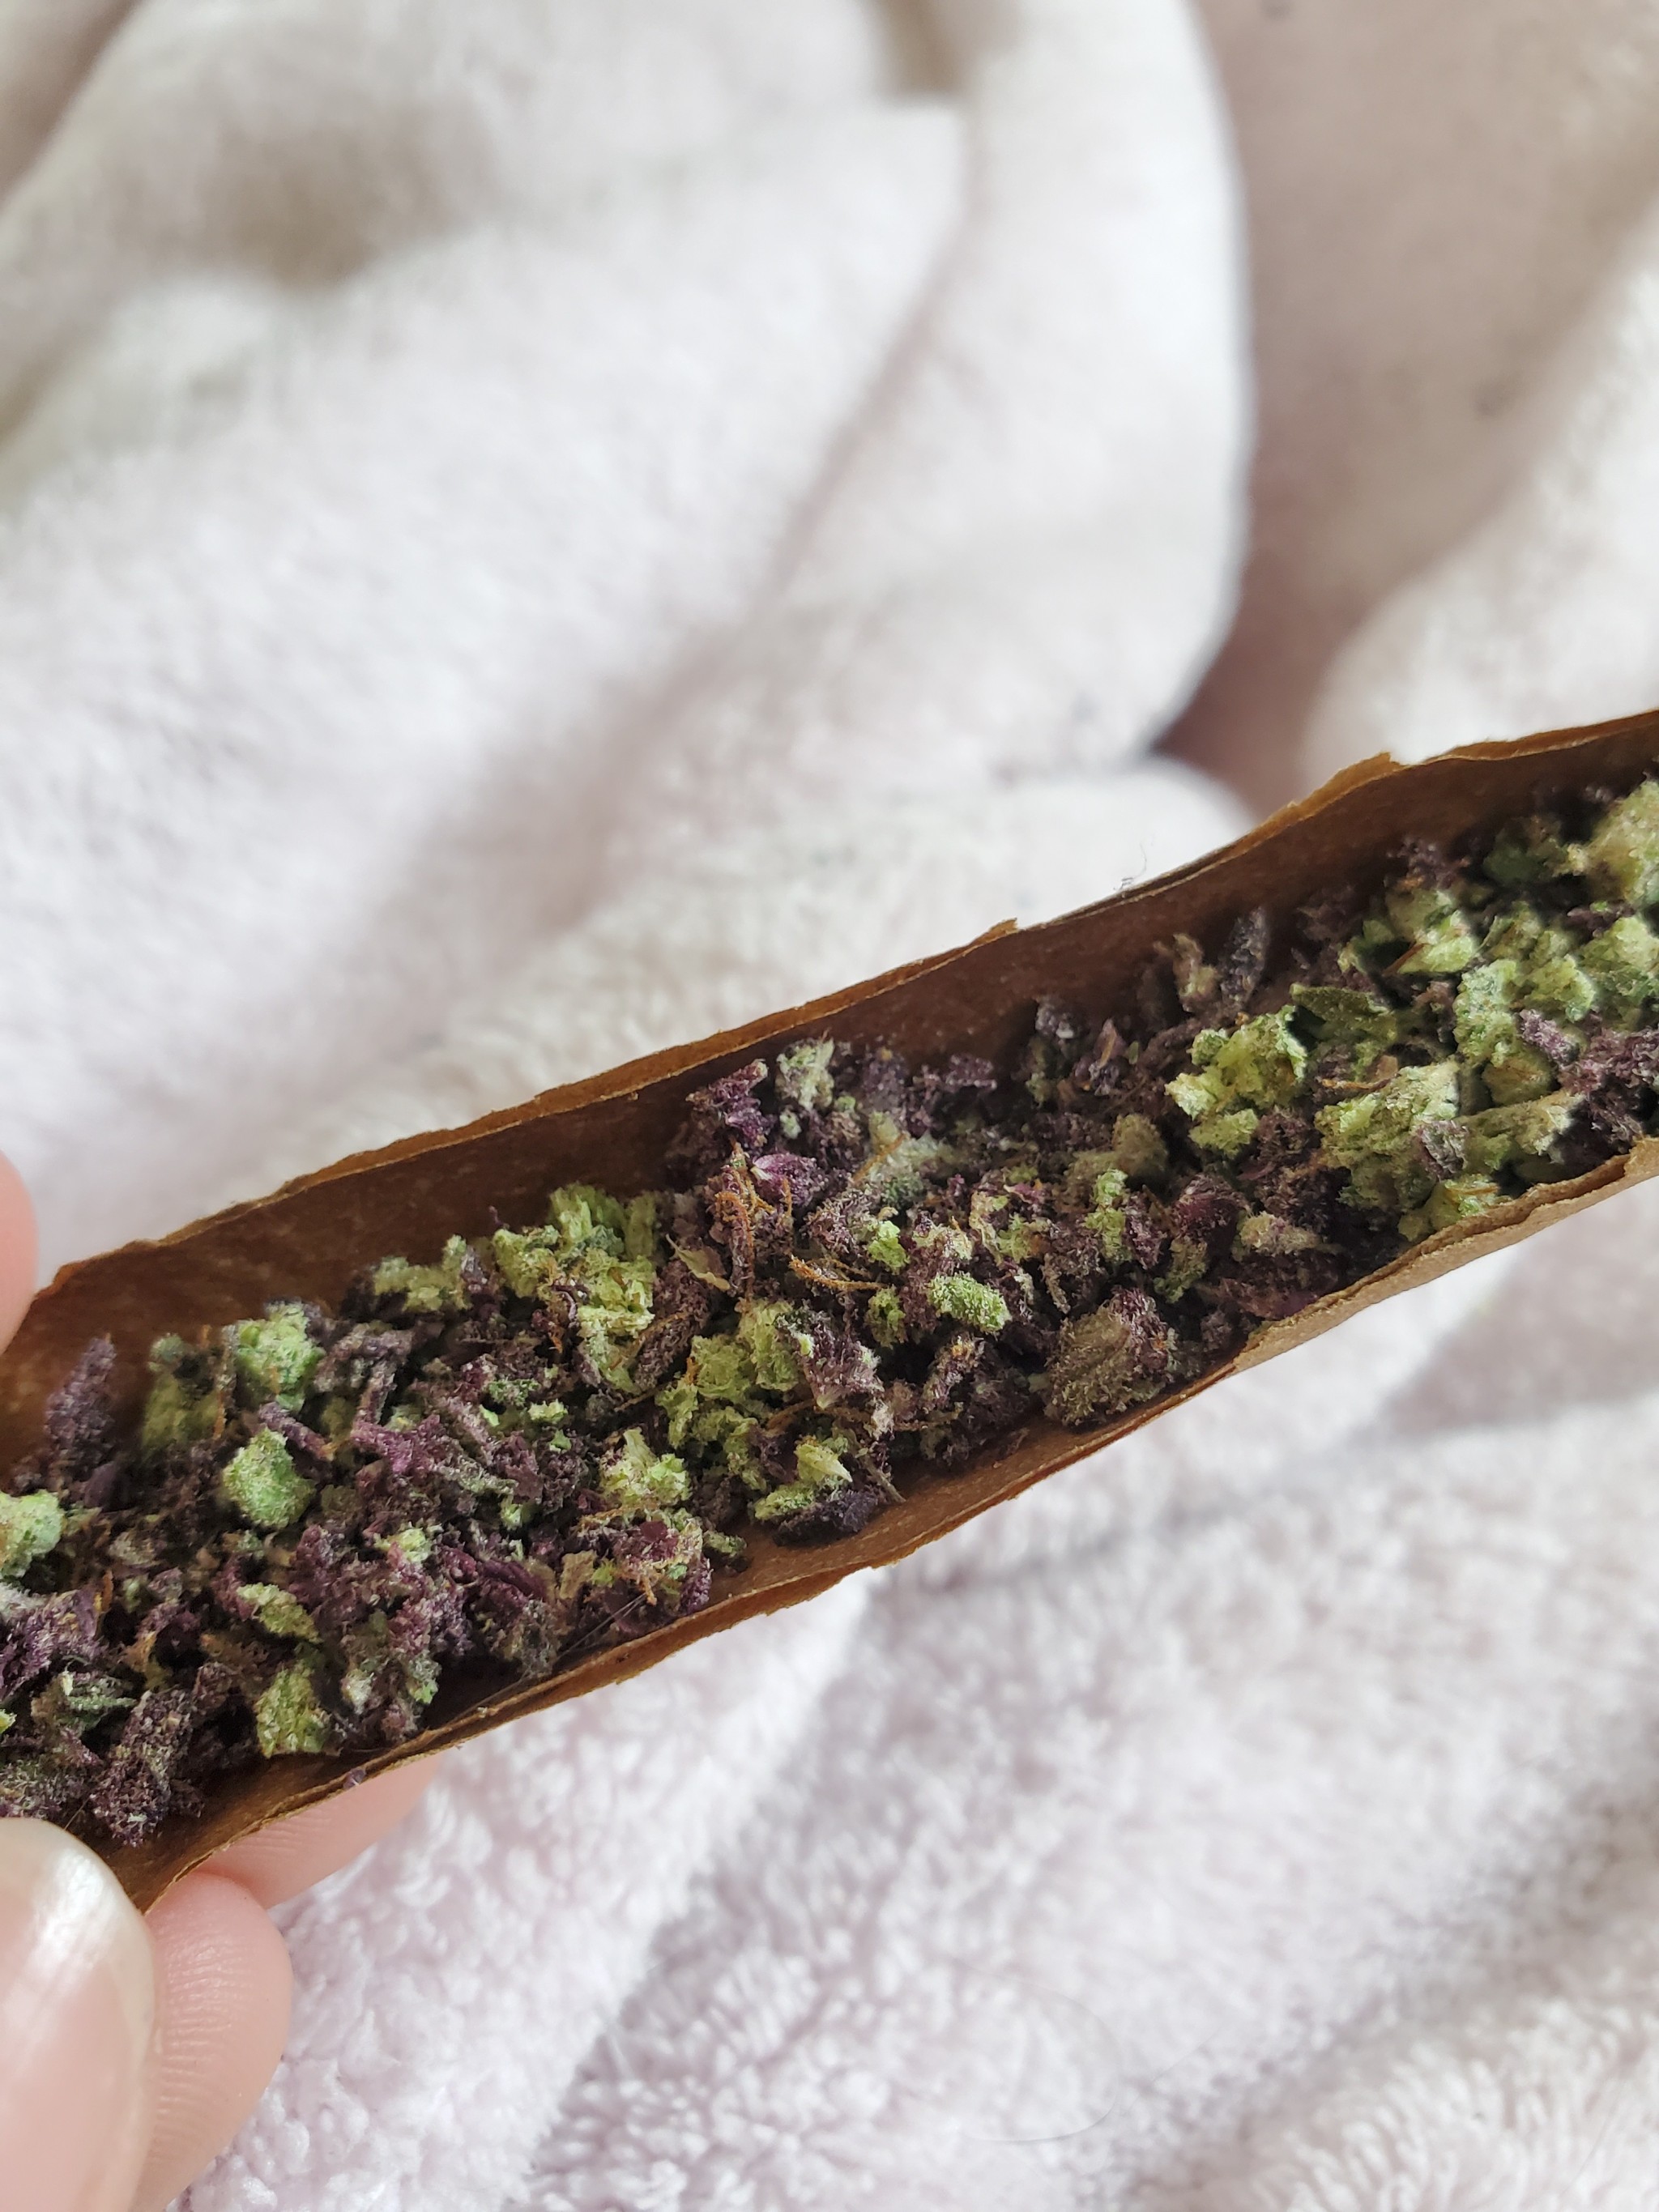 bre-is-stoned:I always love purple weed 